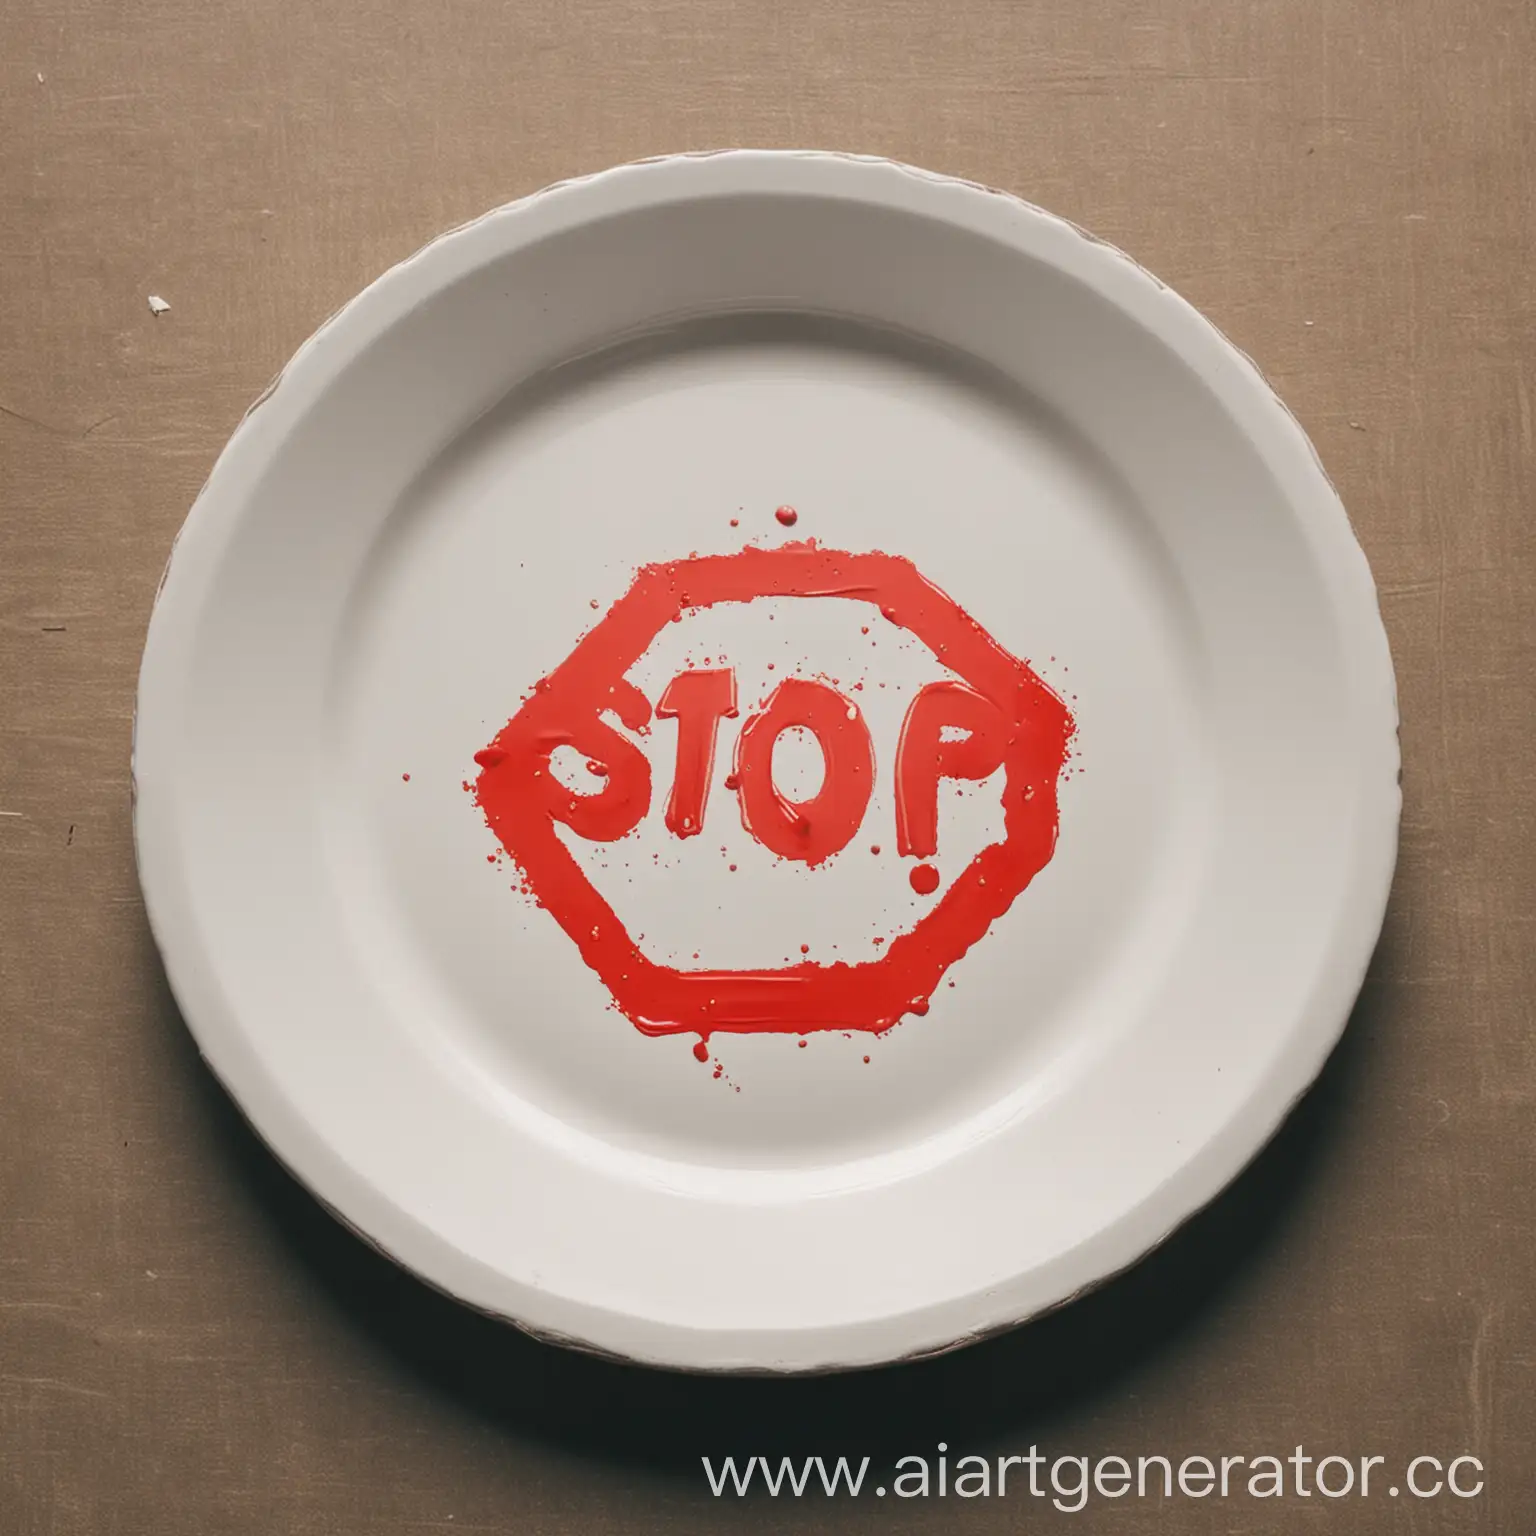 Empty-Plate-with-Stop-Sign-Markings